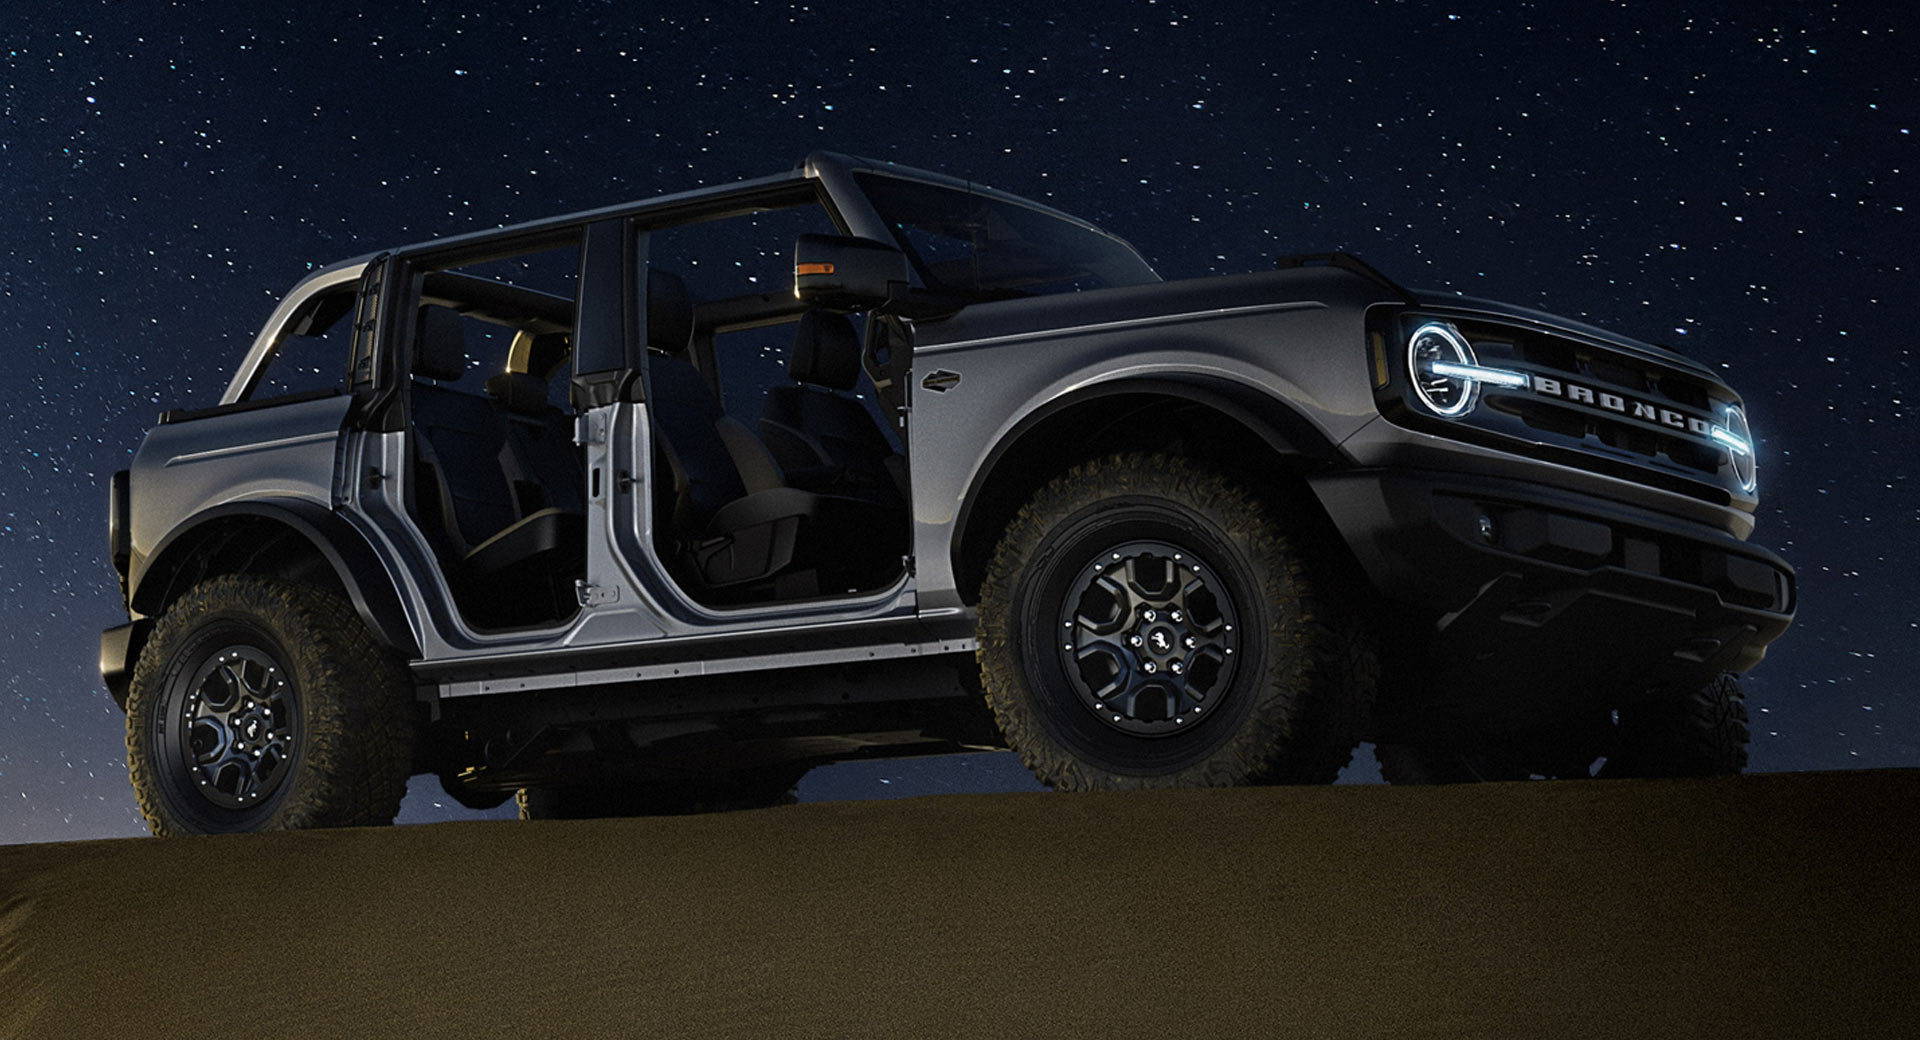 Newsflash: The 2021 Ford Bronco Is Even Cooler Than It Looks | Carscoops